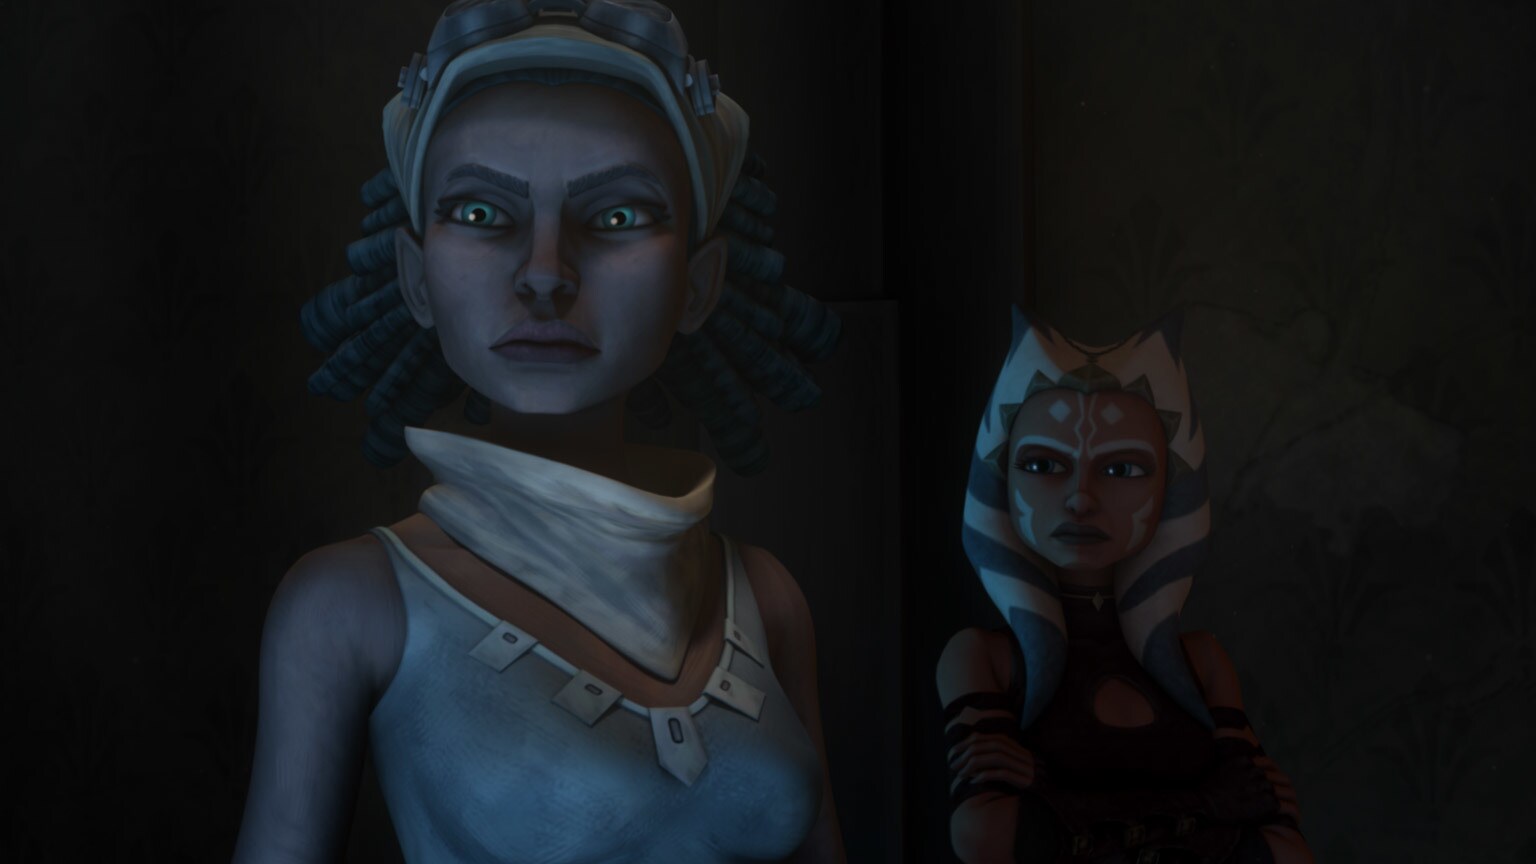 The Clone Wars Rewatch: Harsh Realities in "The Soft War"